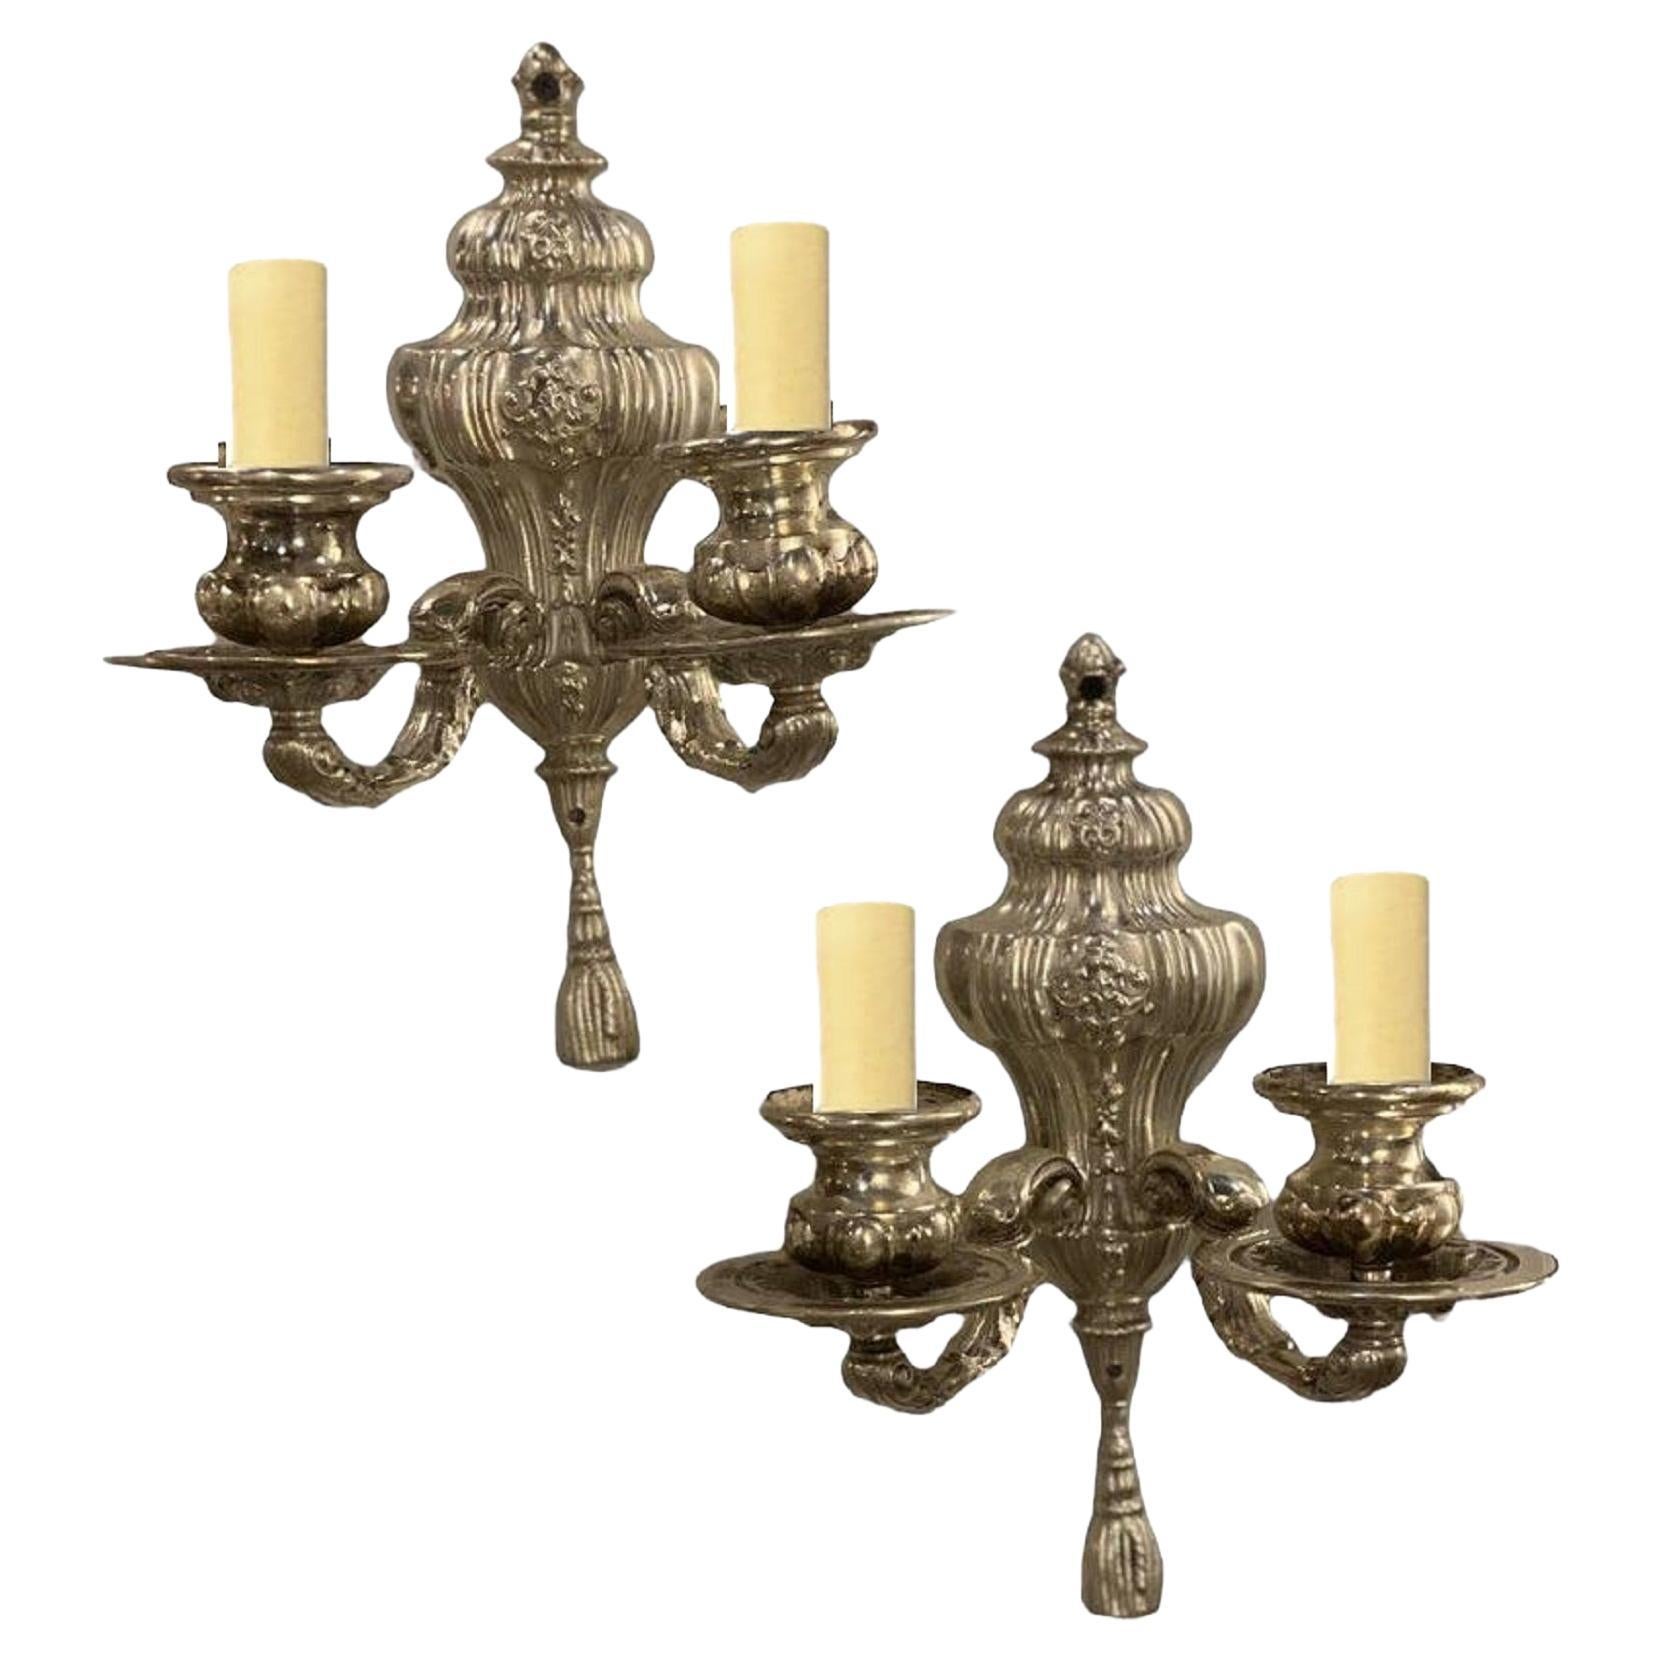 1920's Caldwell Silver Plated Engraved Sconces For Sale